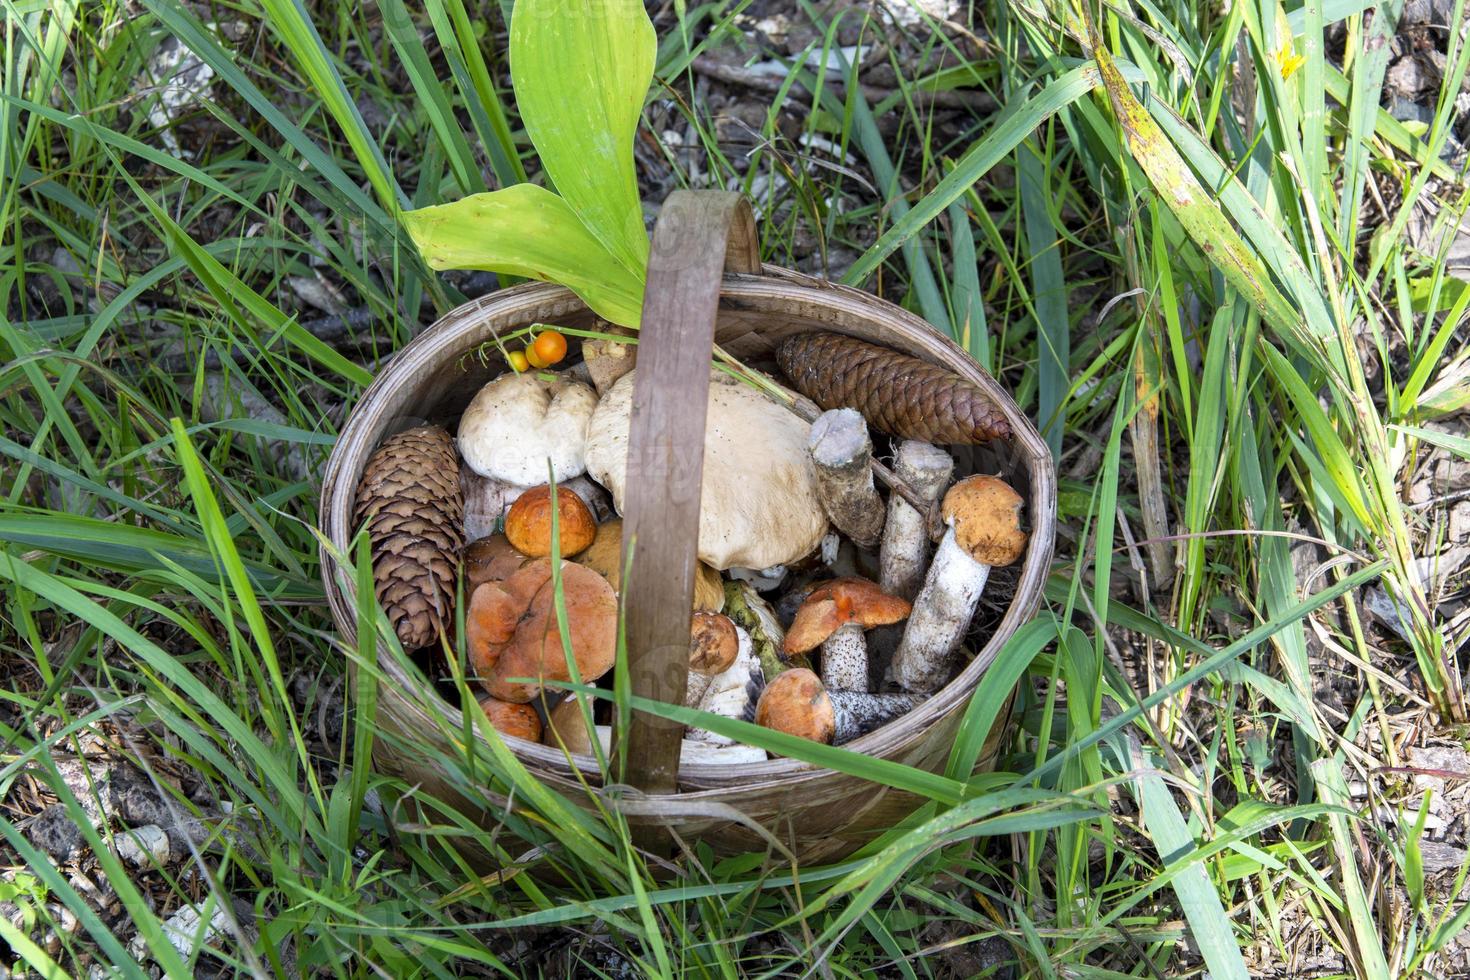 Mushrooms in a basket. Collecting edible mushrooms in the forest. photo